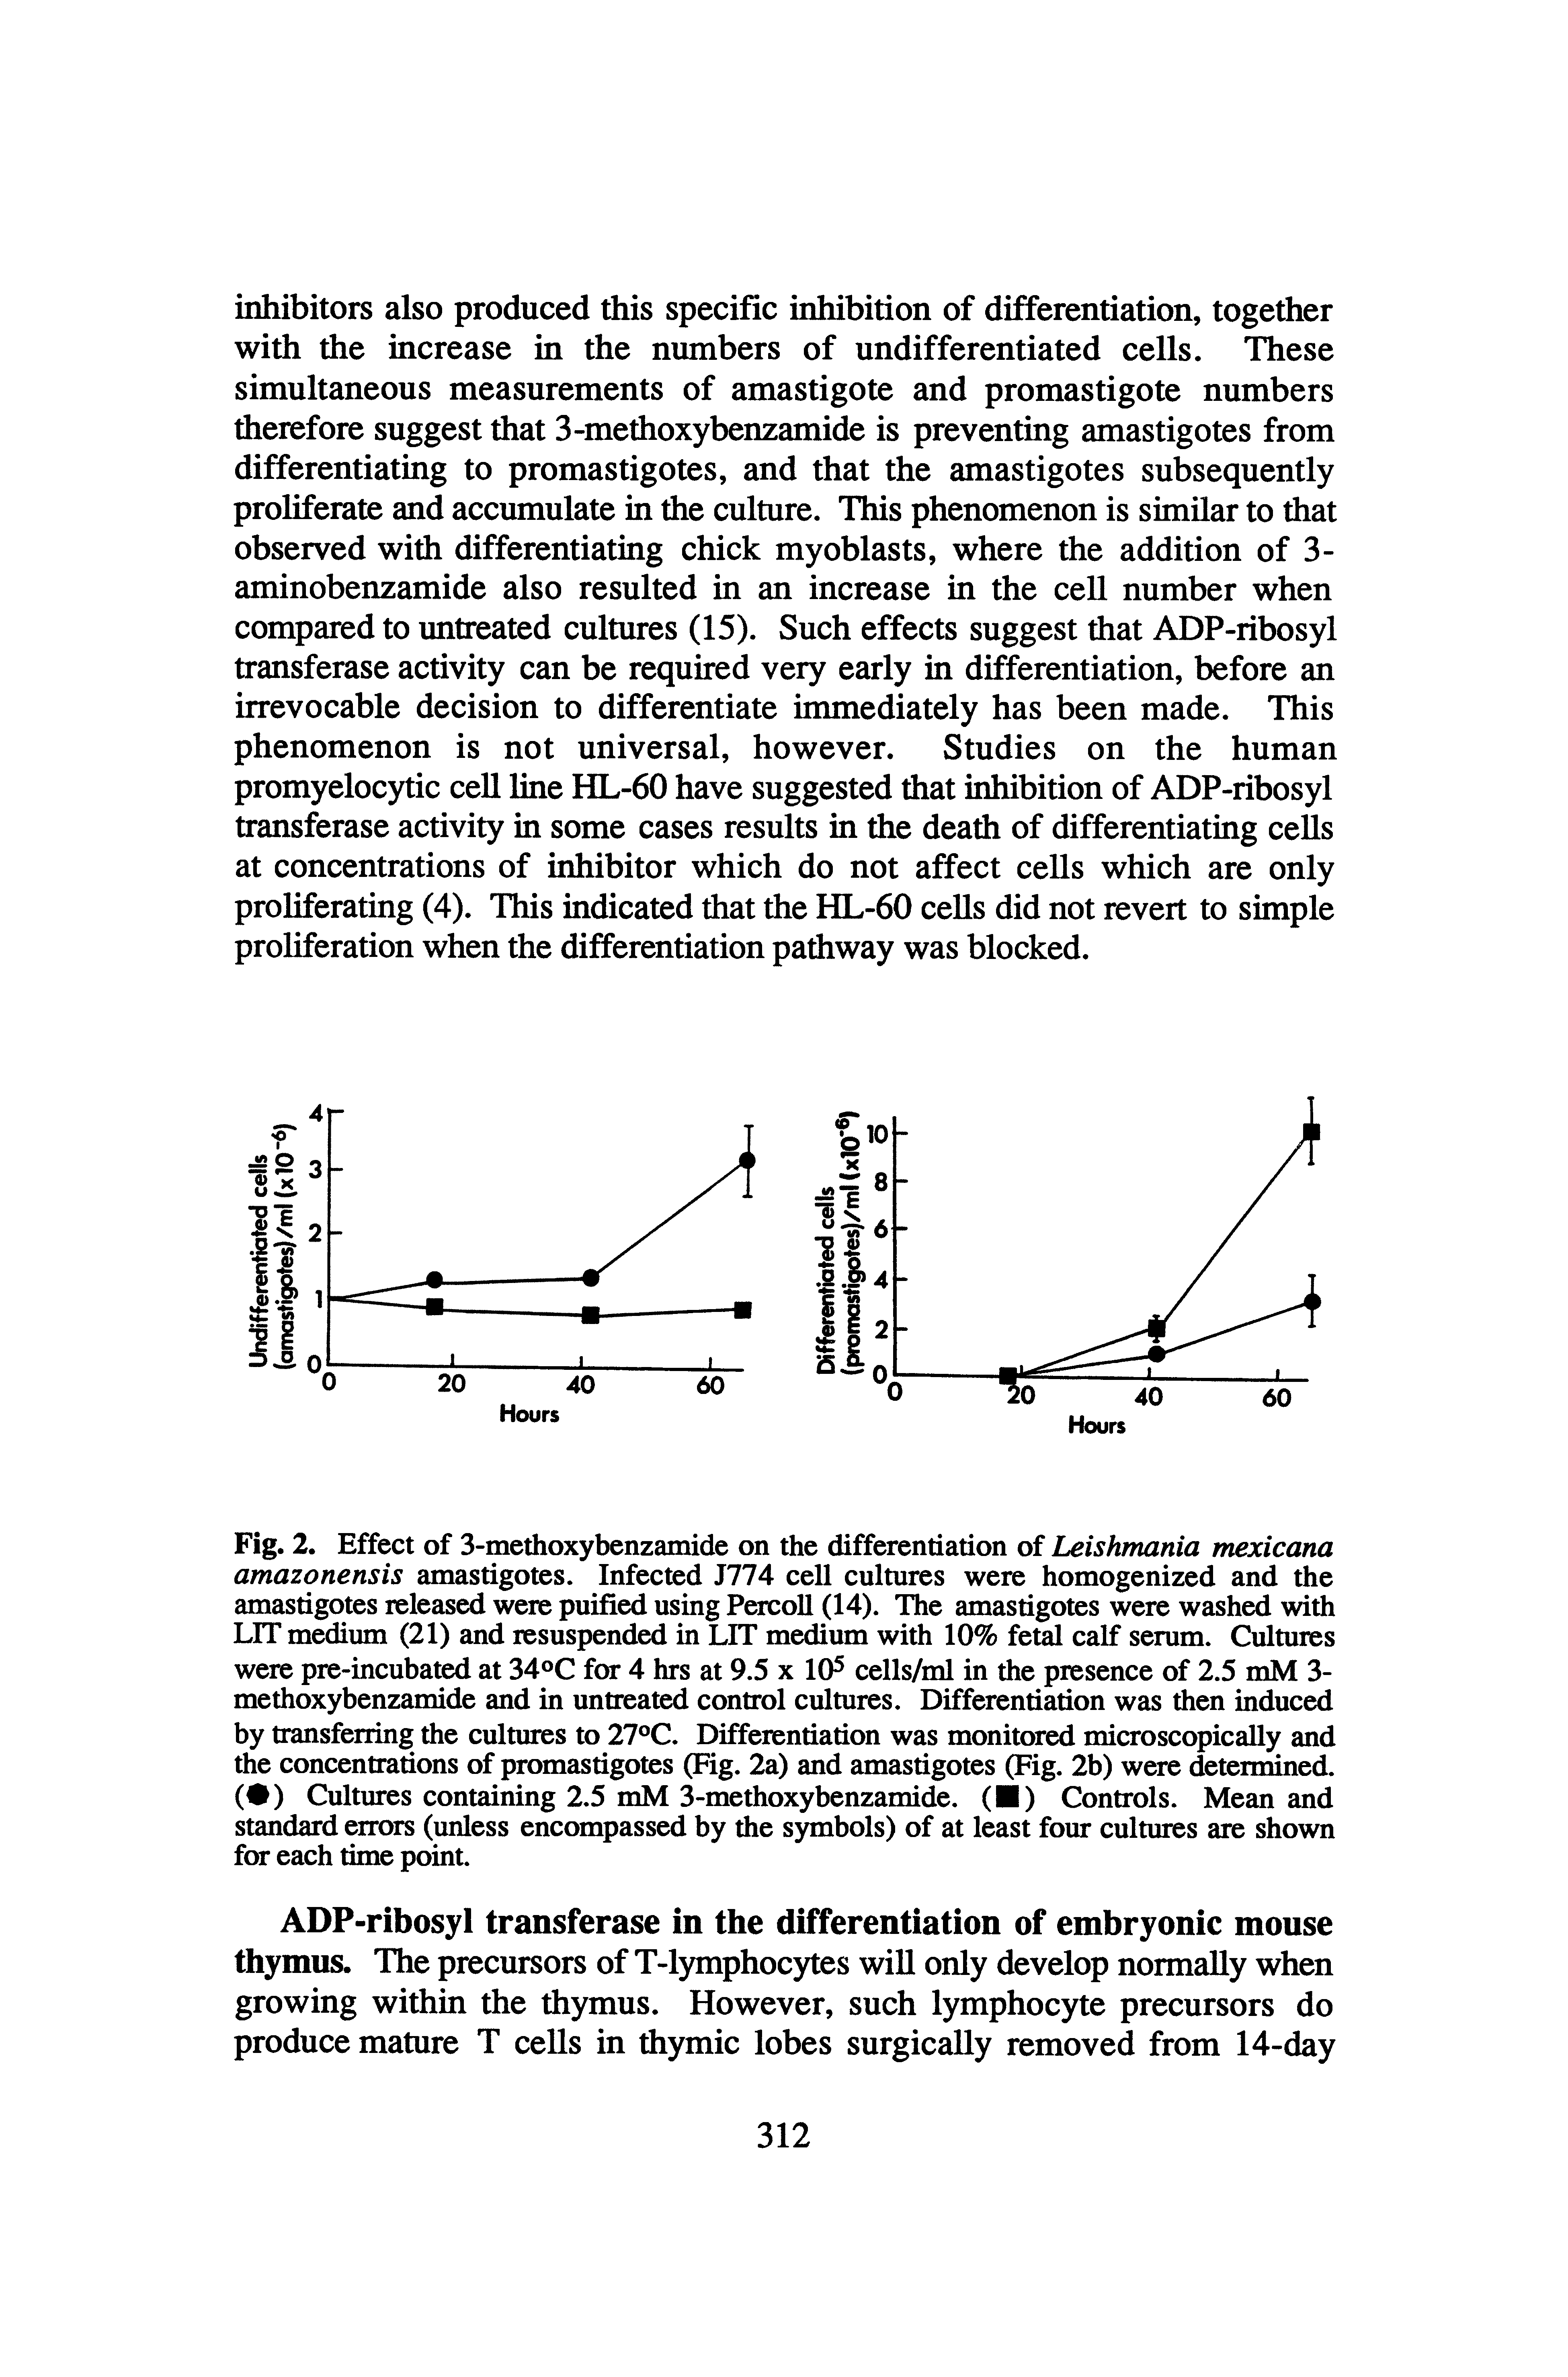 Fig. 2. Effect of 3-methoxybenzamide on the differentiation of Leishmania mexicana amazonensis amastigotes. Infected J774 cell cultures were homogenized and the amastigotes released were puified using PercoU (14). The amastigotes were washed with LIT m um (21) and resuspended in LIT medium with 10% fet calf serum. Cultures were pre-incubated at 34°C for 4 hrs at 9.5 x lO cells/ml in the presence of 2.5 mM 3-methoxybenzamide and in untreated control cultures. Differentiation was then induced by transferring the cultures to 27°C. Differentiation was monitored microscopically and the concentrations of promastigotes (Fig. 2a) and amastigotes (Fig. 2b) were determined. (4) Cultures containing 2.5 mM 3-methoxybenzamide. ( ) Controls. Mean and standard errors (unless encompassed by the symbols) of at least four cultures are shown for each time point.